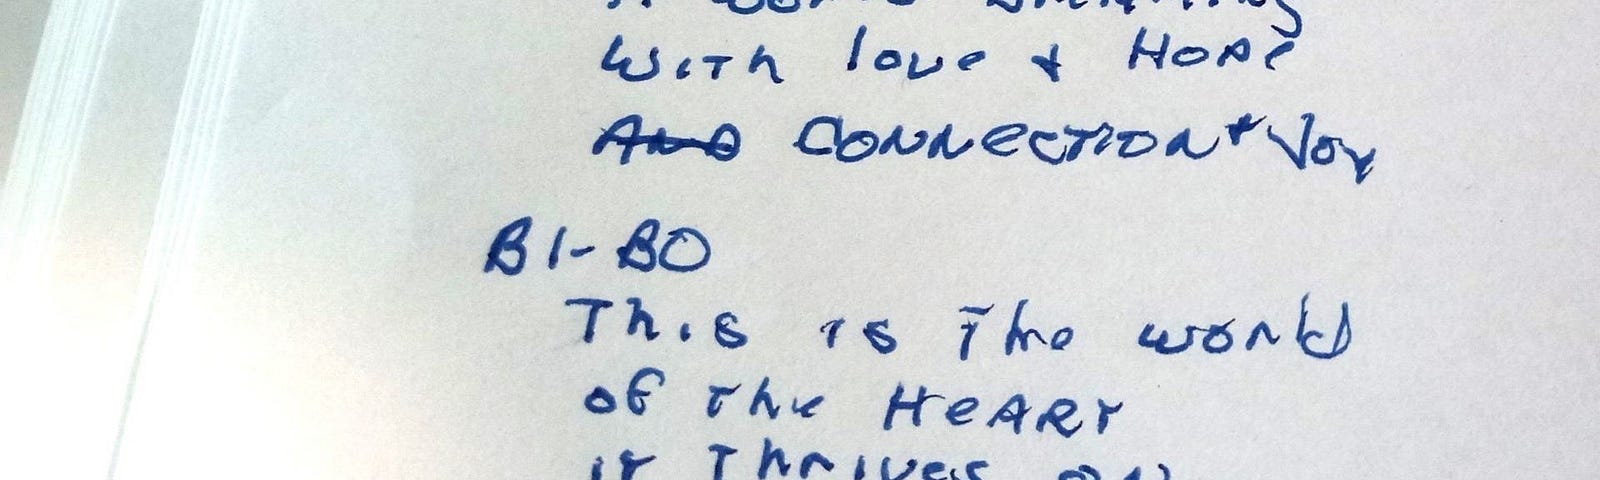 Handwritten portion of the post